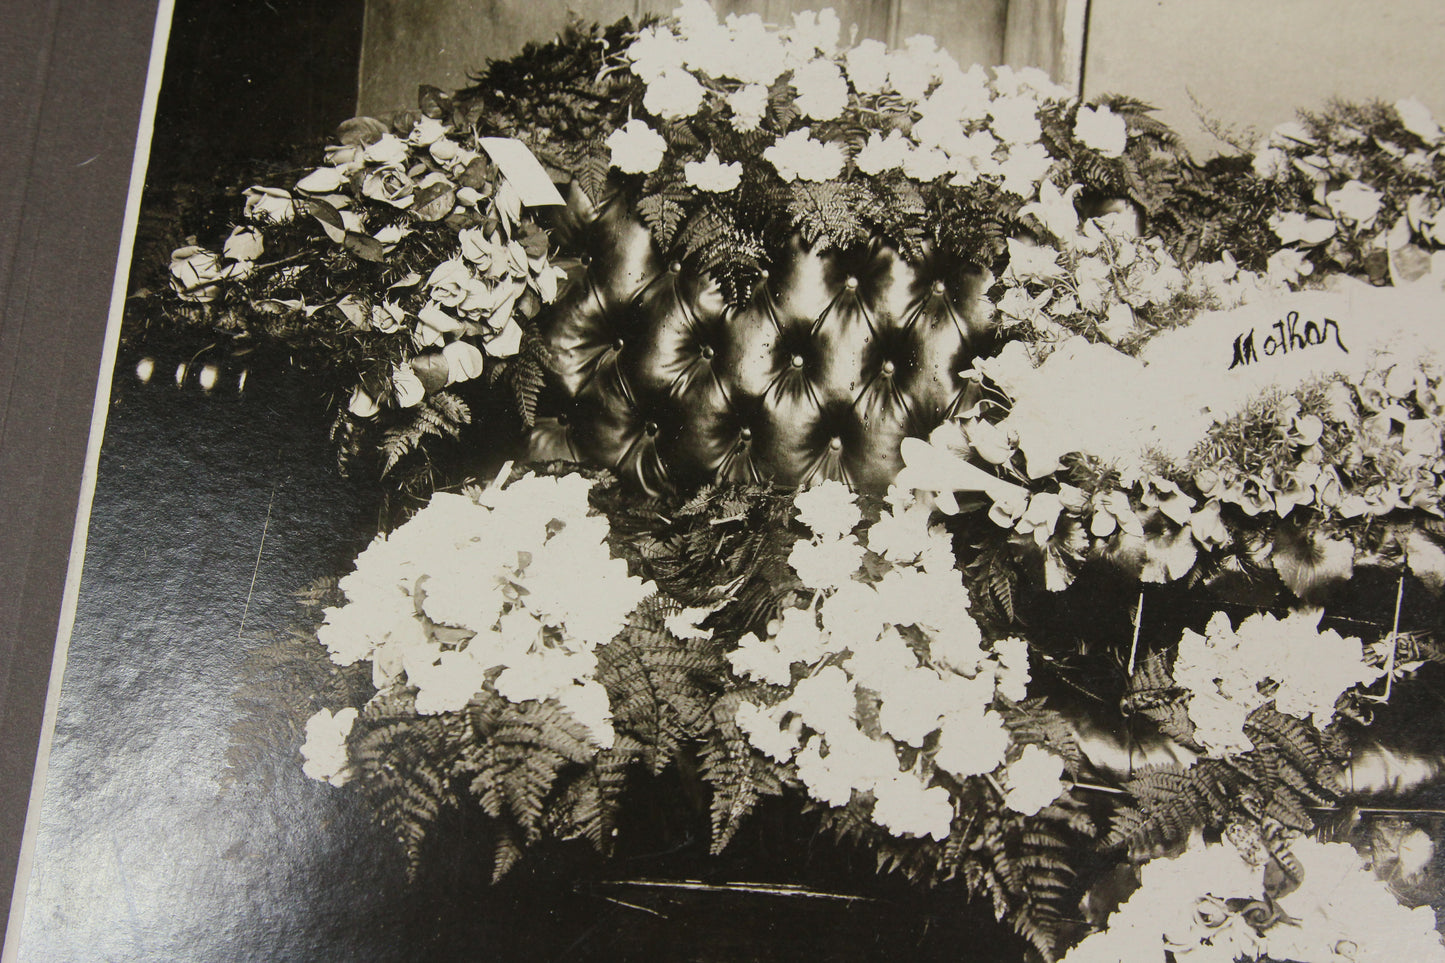 Antique Matted Funeral Flower Arrangement Photograph for Mother, Dated May 10th, 1913